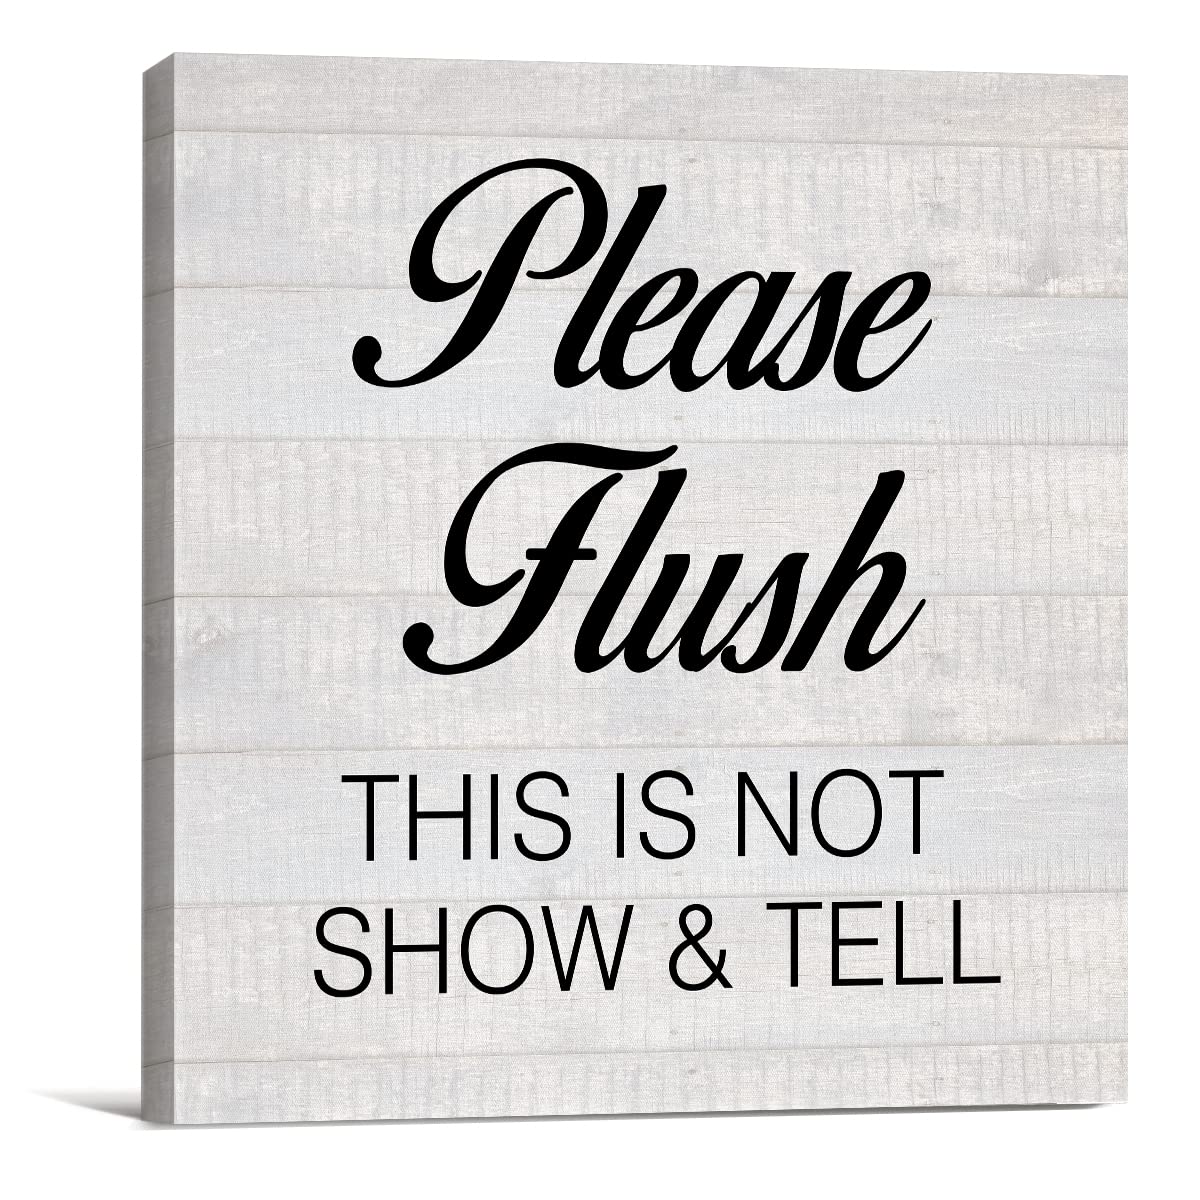 Country Please Flush Funny Restroom Canvas Prints Wall Art Decor Humor Bathroom Poster Painting Framed Artwork 8 x 8 Inch Home Shelf Wall Decoration Housewarming Gift